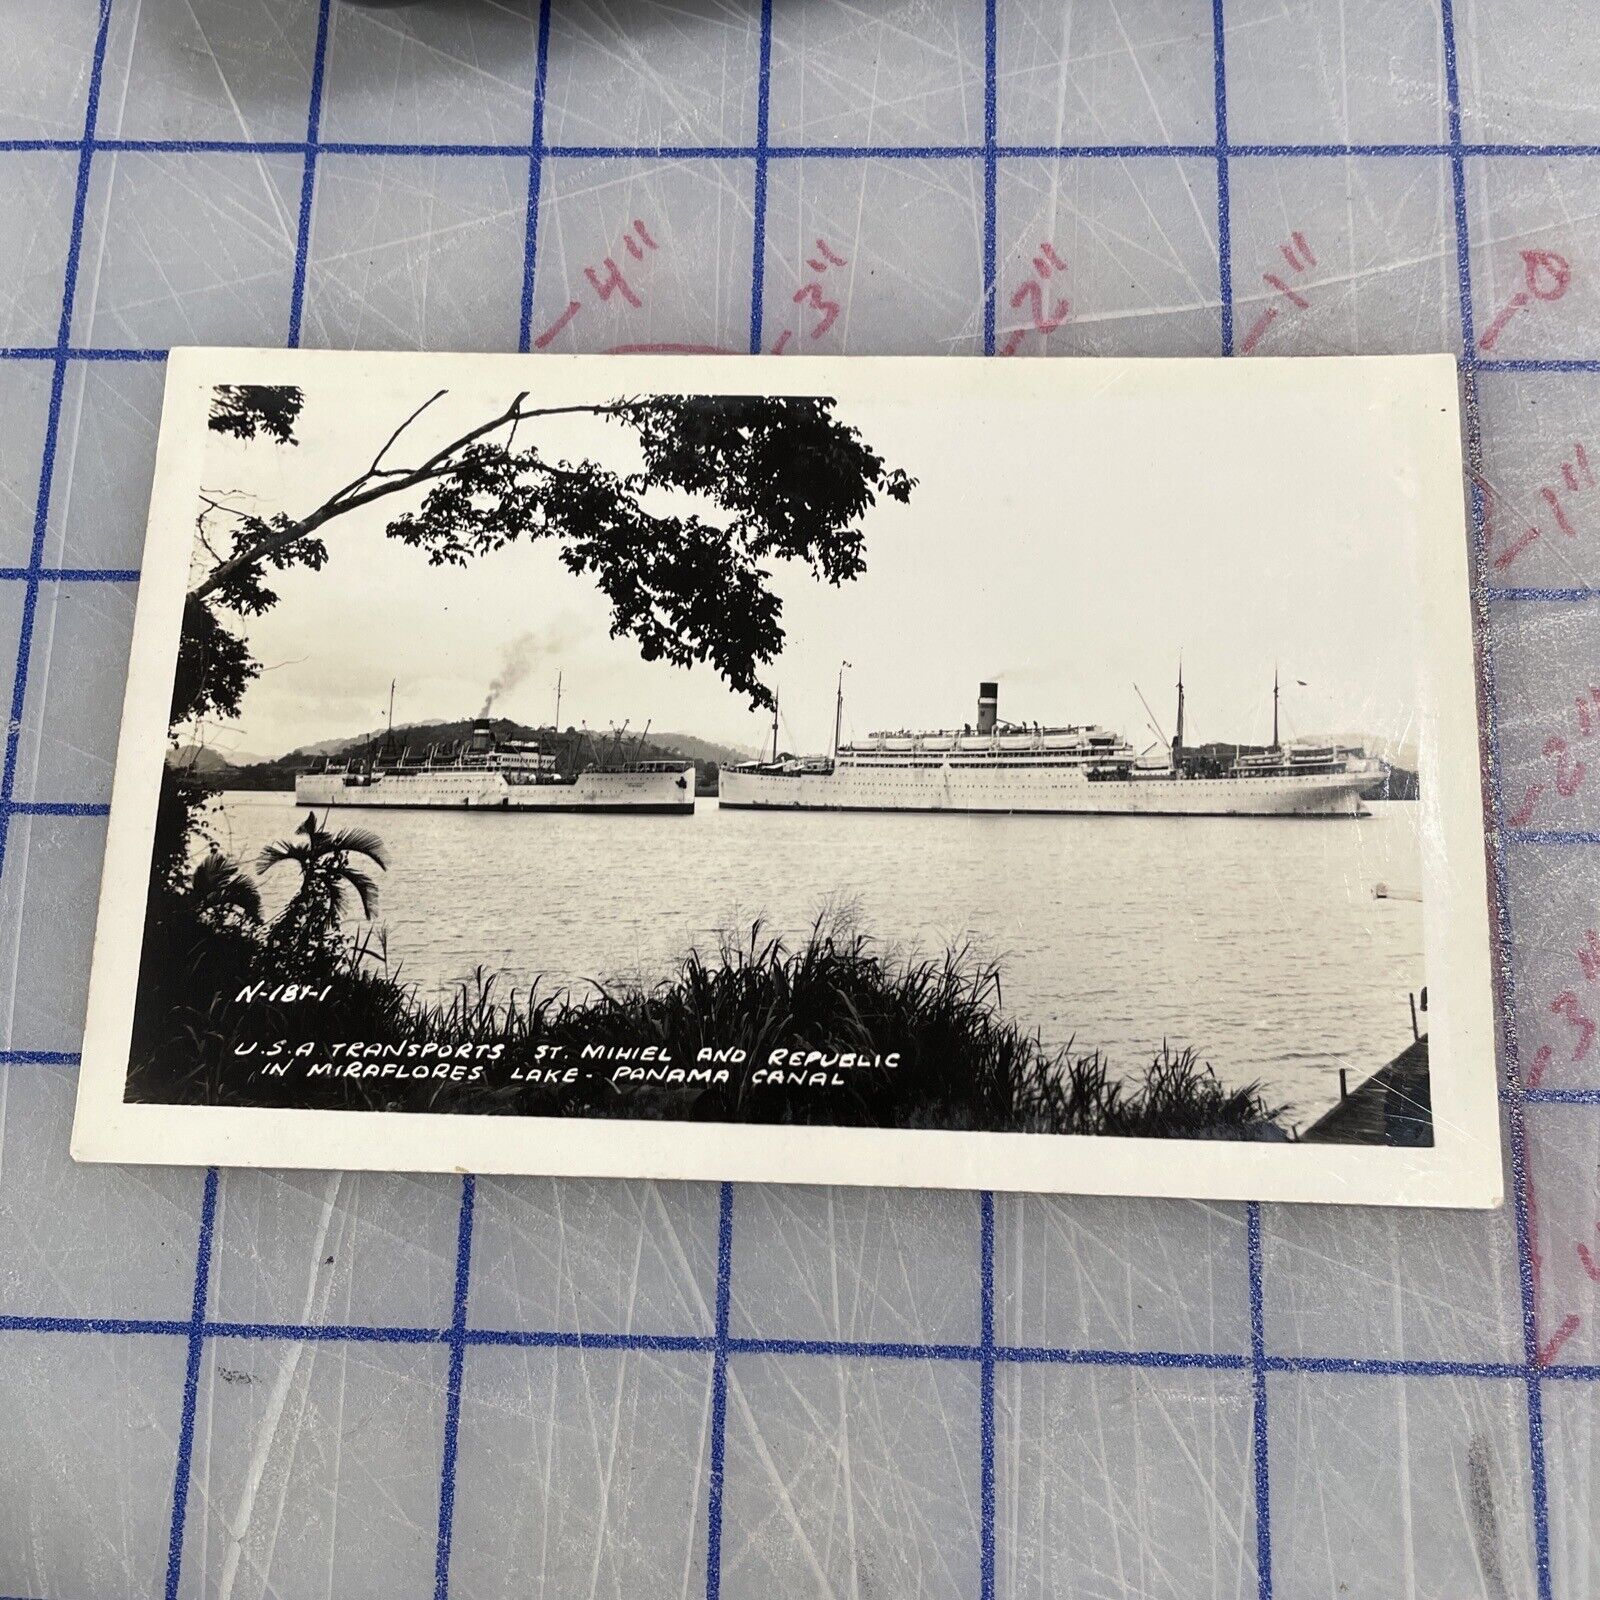 Picture postcard USA Transports St. Mihiel And Republic Miraflores Panama Canal